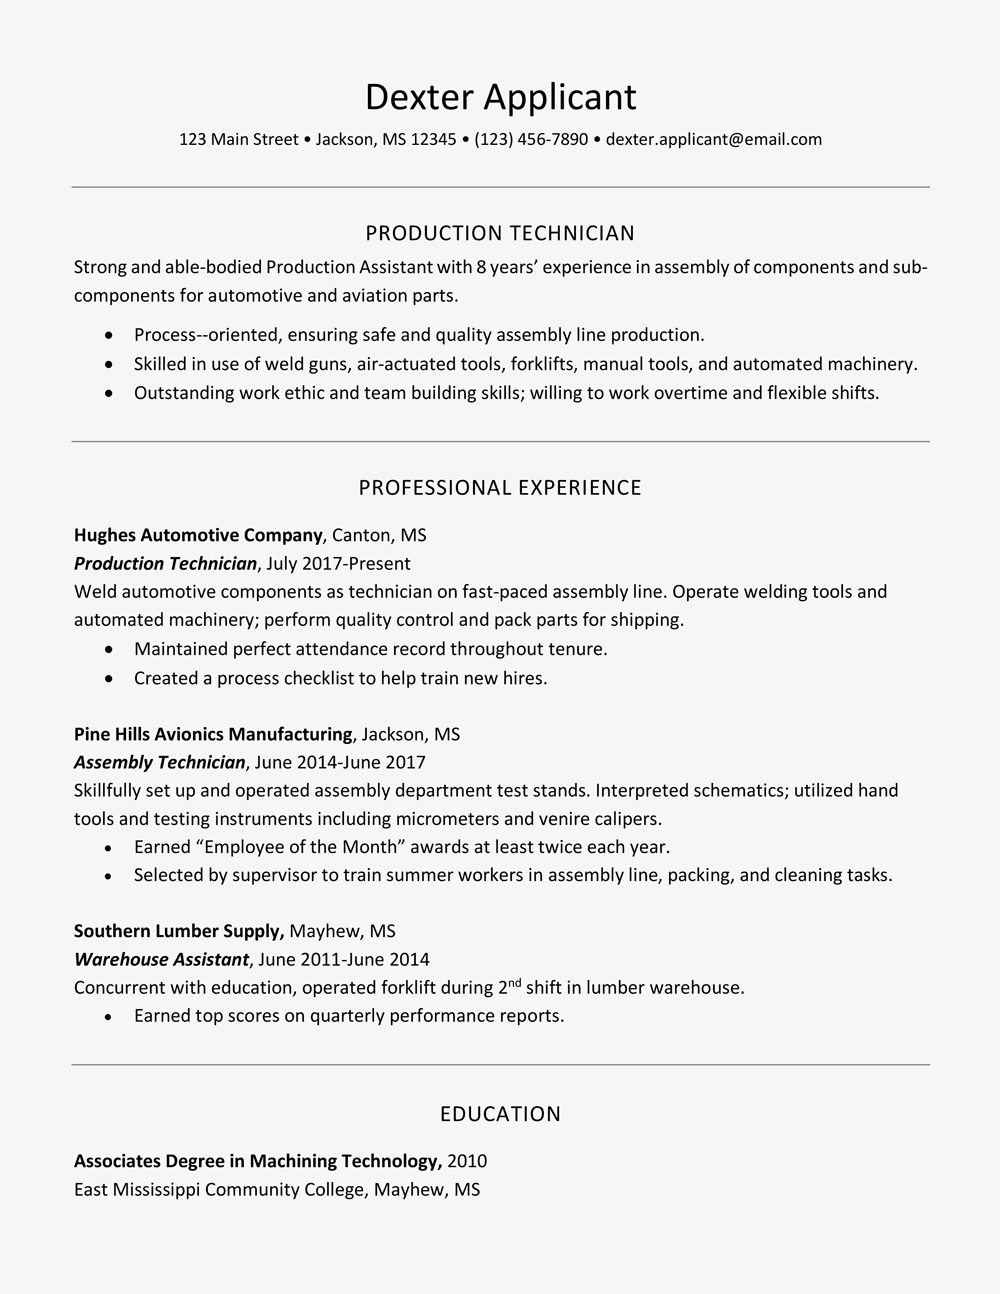 How to Create a Professional Resume?